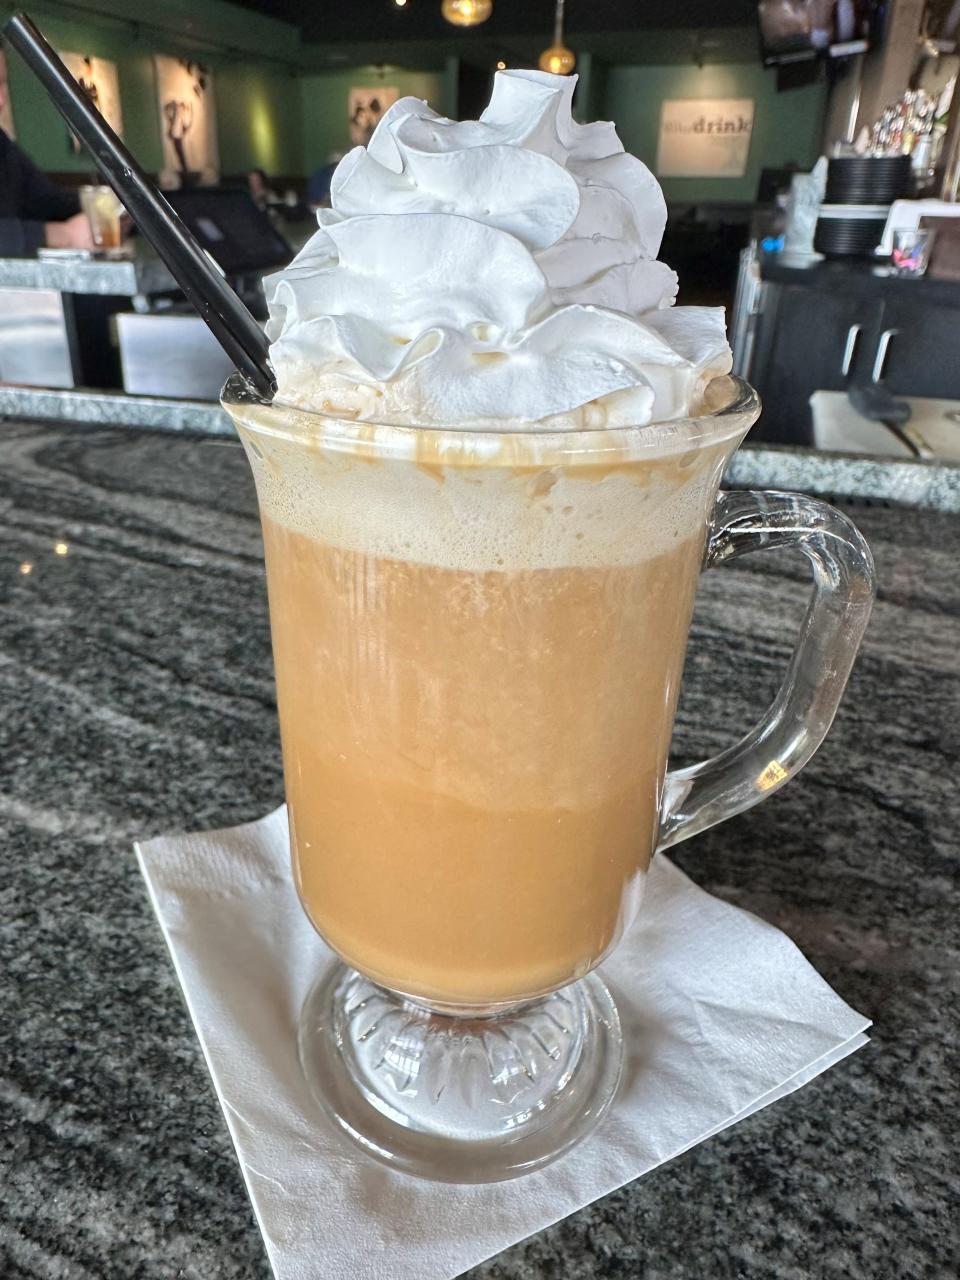 If you've not had Irish coffee, Table Six Kitchen + Bar is serving up this decadent drink consisting of Jameson Irish Whiskey, Bailey's Irish Cream, brown sugar and strong coffee, with whipped cream on top.